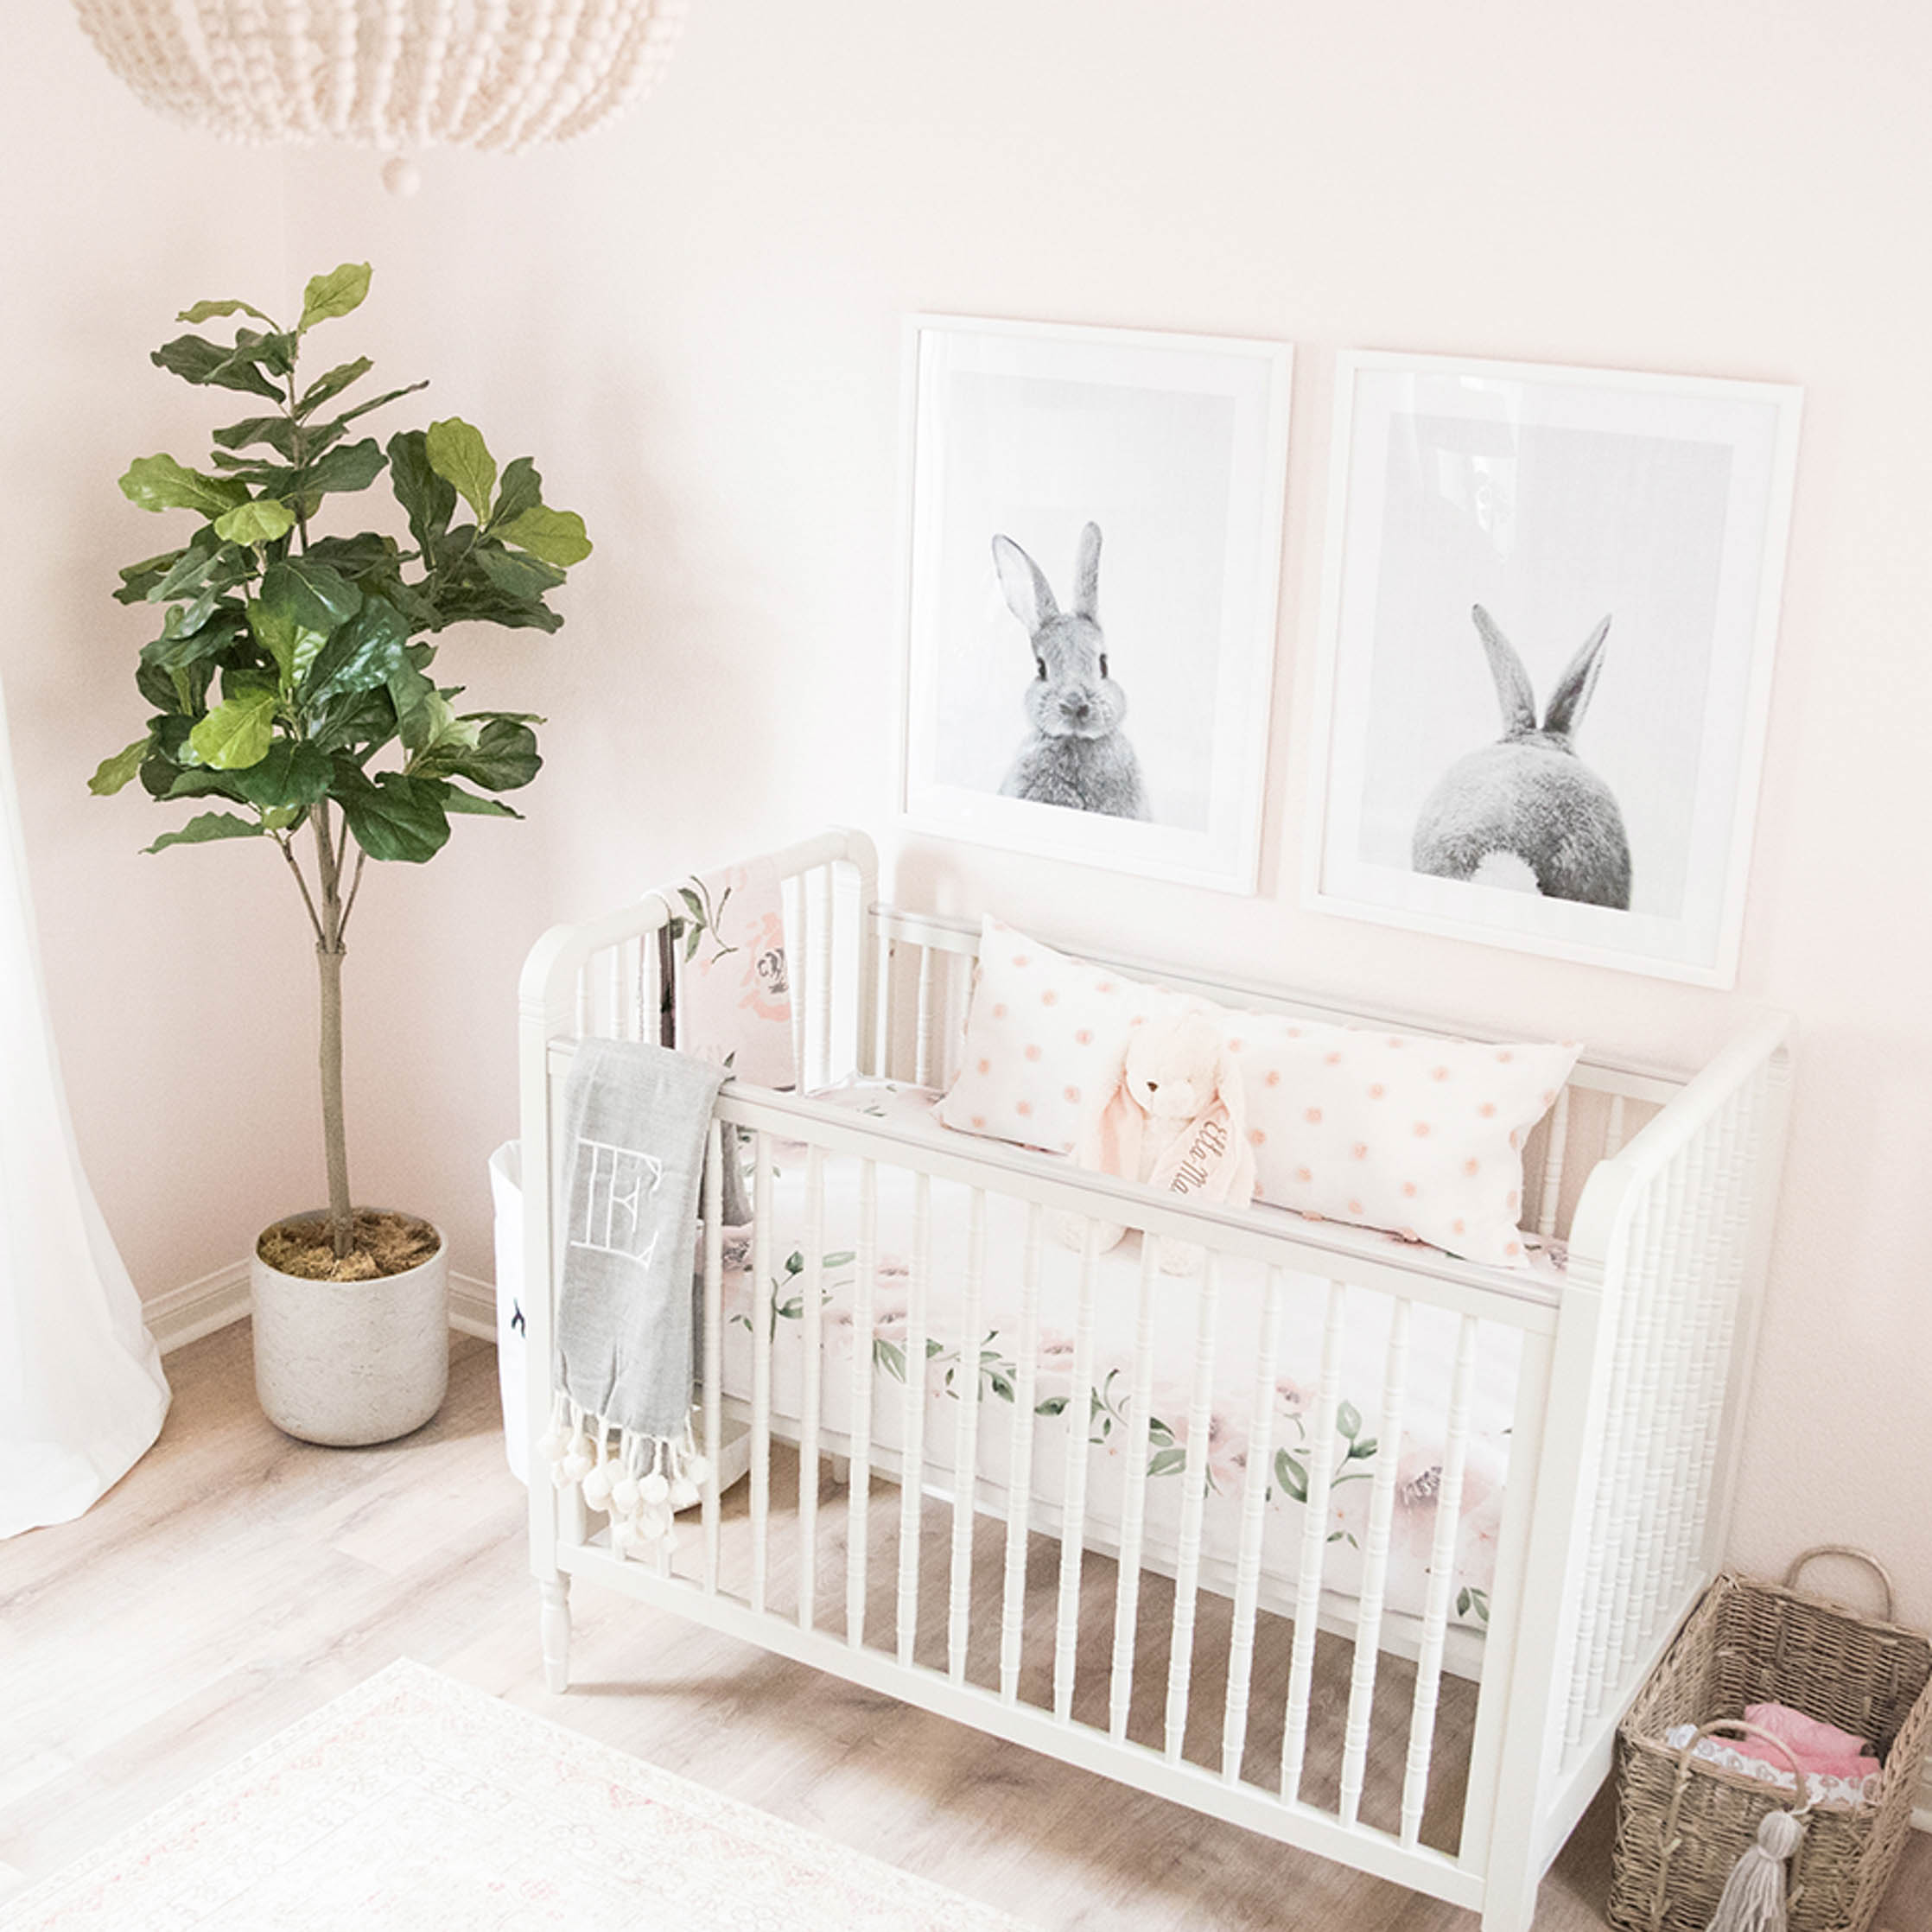 Project Gallery Bunny-Inspired Nursery 2